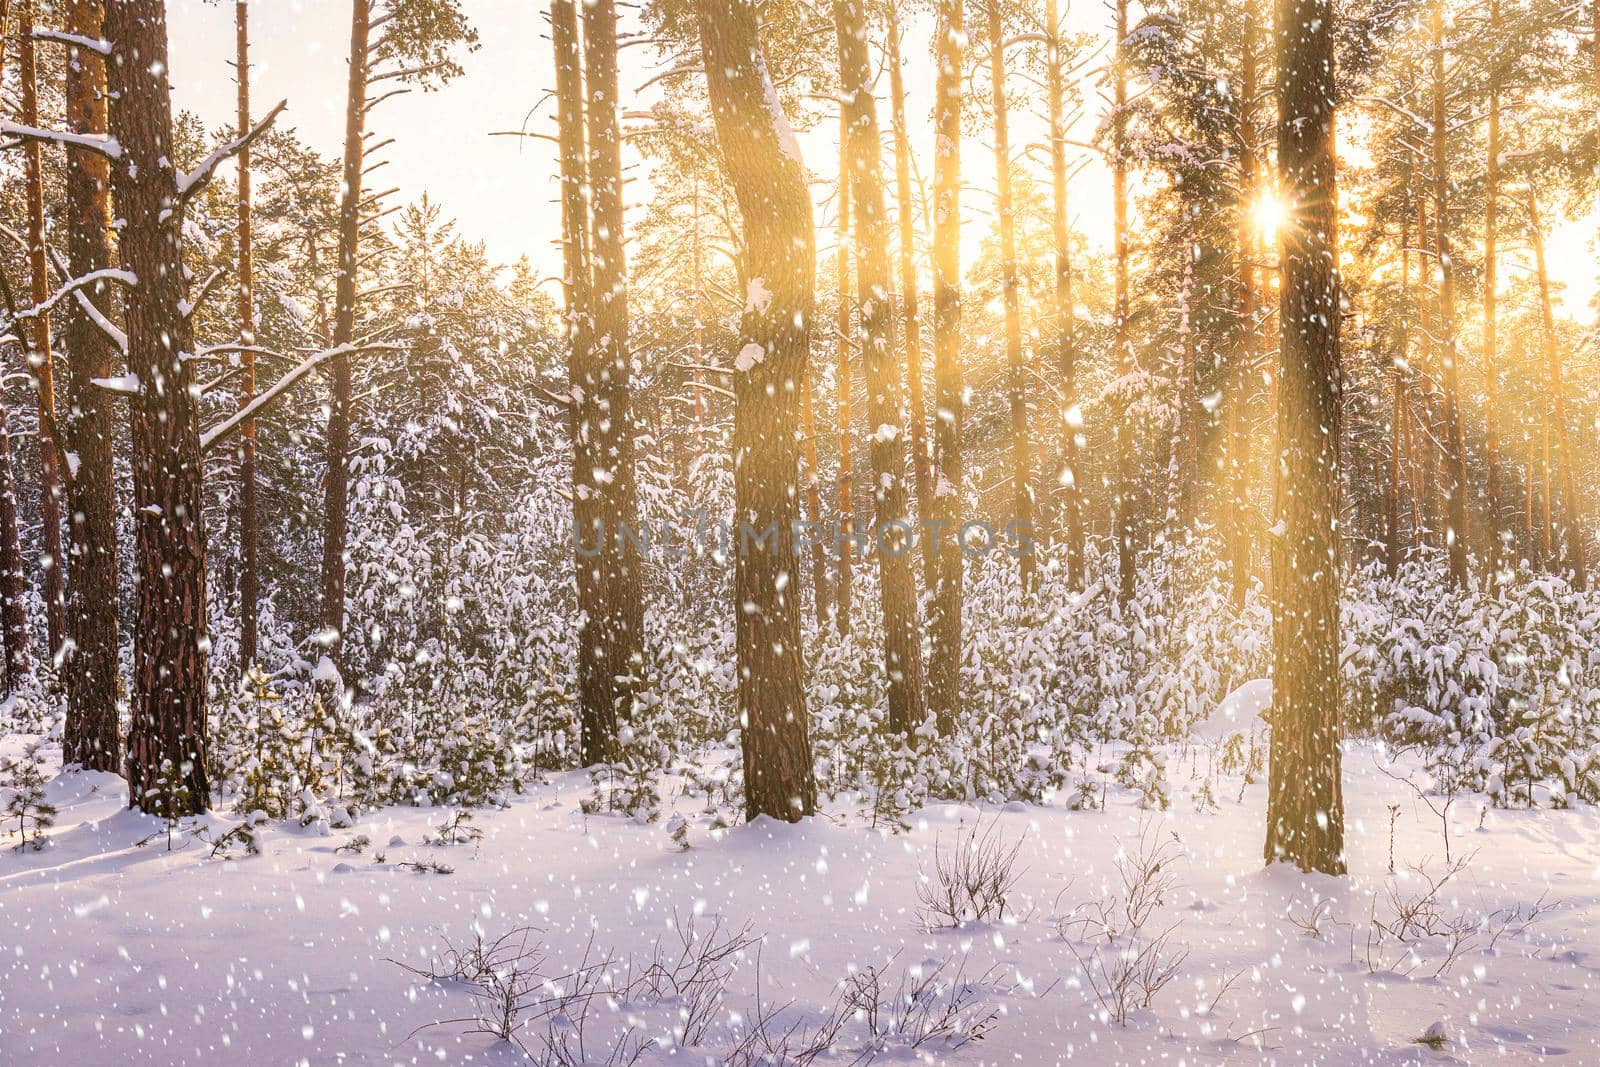 Sunset in the winter pine forest with falling snow. Rows of pine trunks with the sun's rays passing through them. Snowfall. by Eugene_Yemelyanov